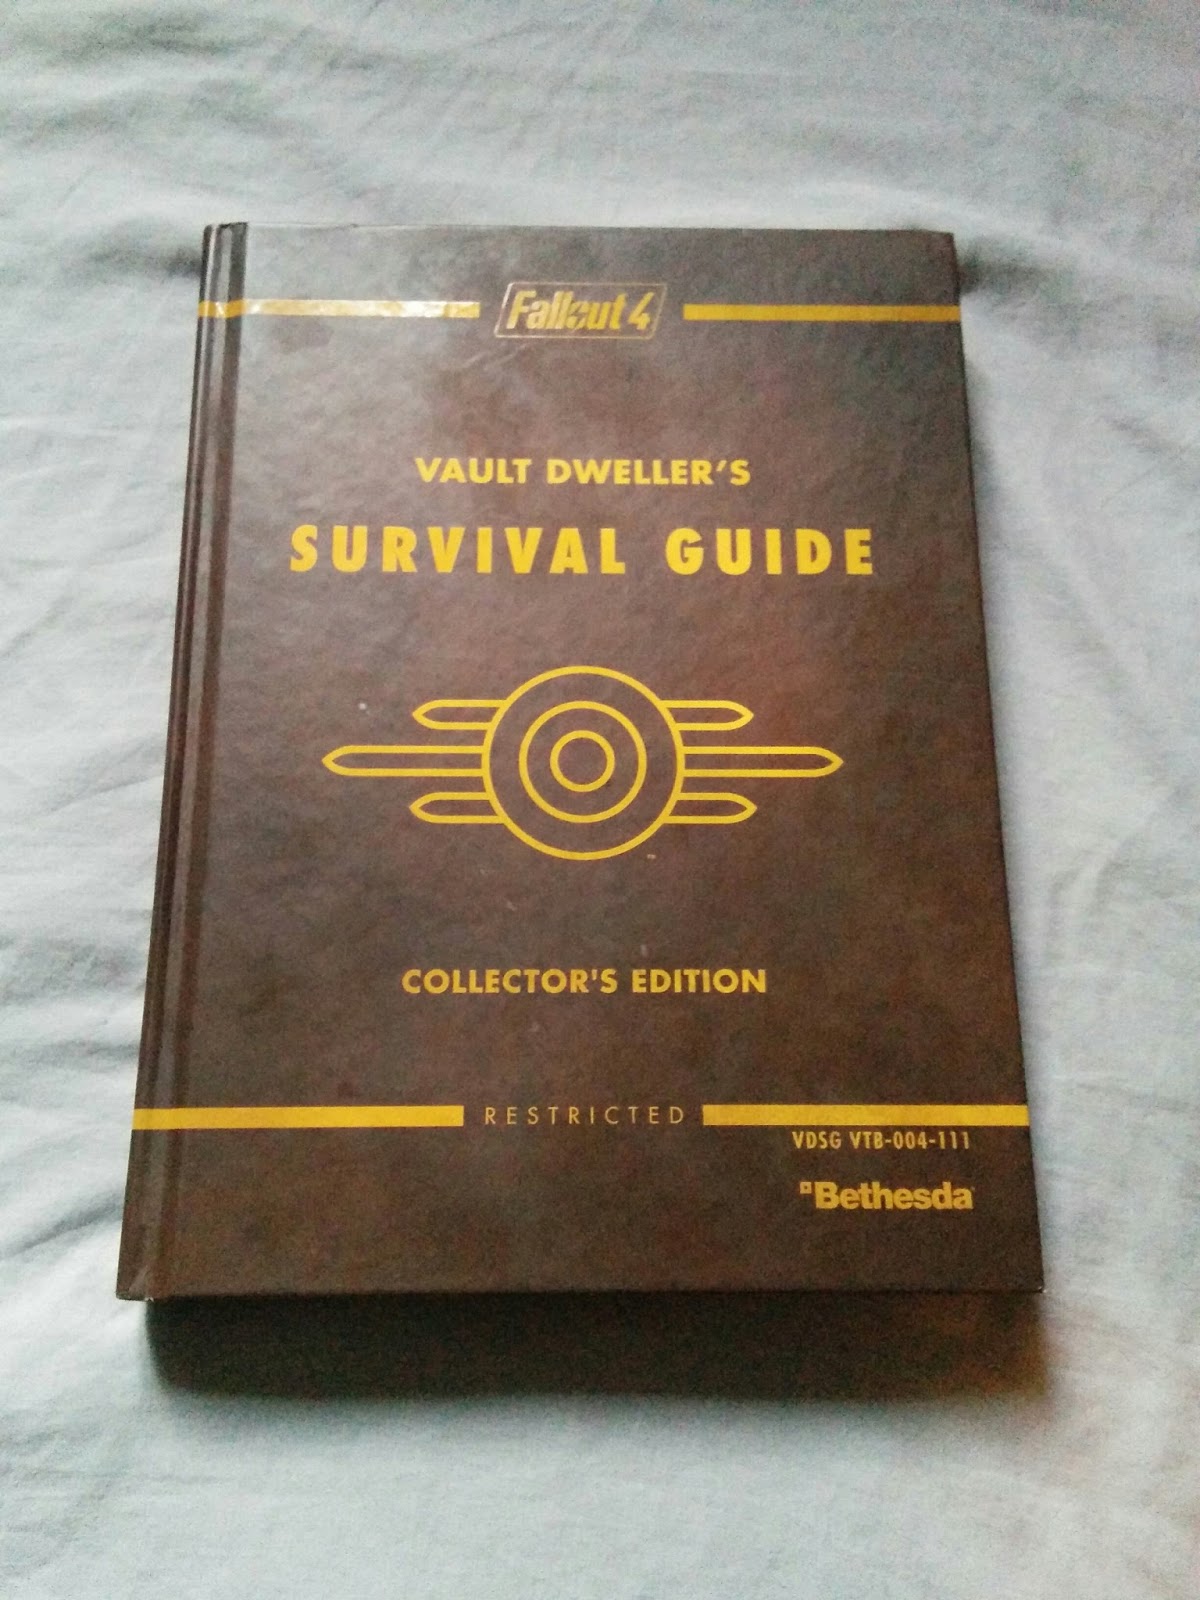 Mekanical Eye: Fallout 4 Survival Guide Book Review